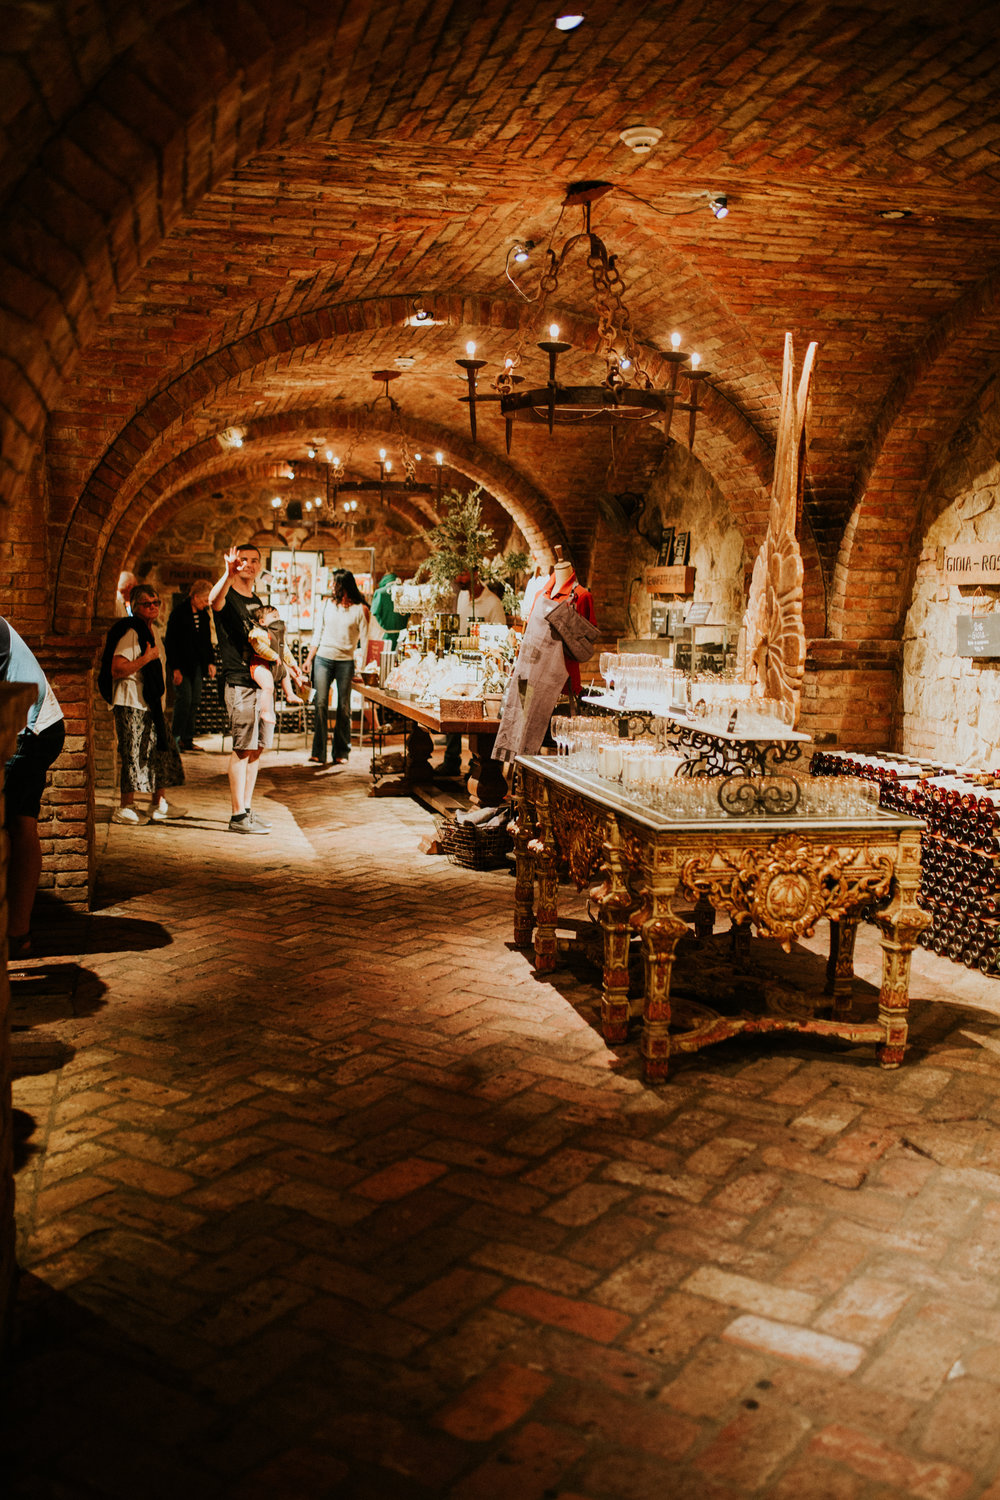  Have you tried wine tasting in a dungeon? 